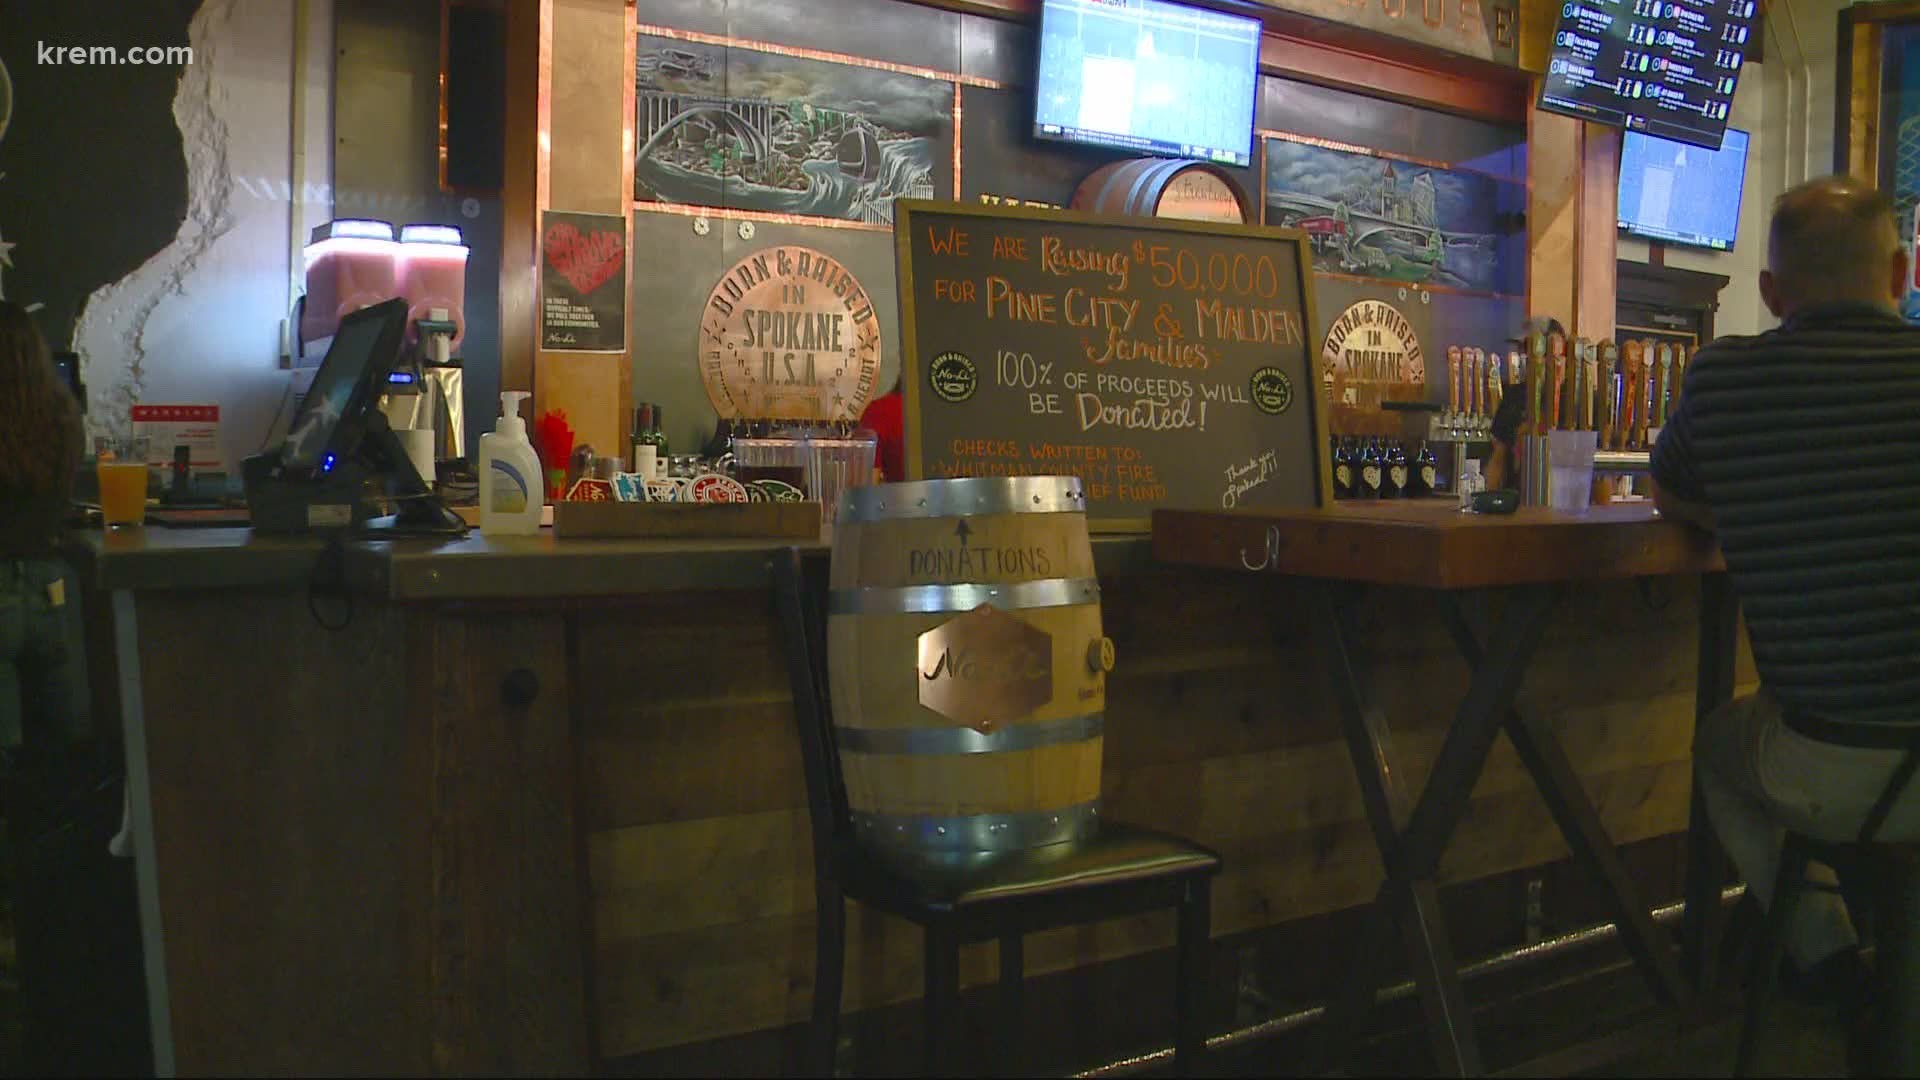 The owner of No Li Brewhouse made an offer and the community stepped up. Now, they're raising the goal to $100,000.